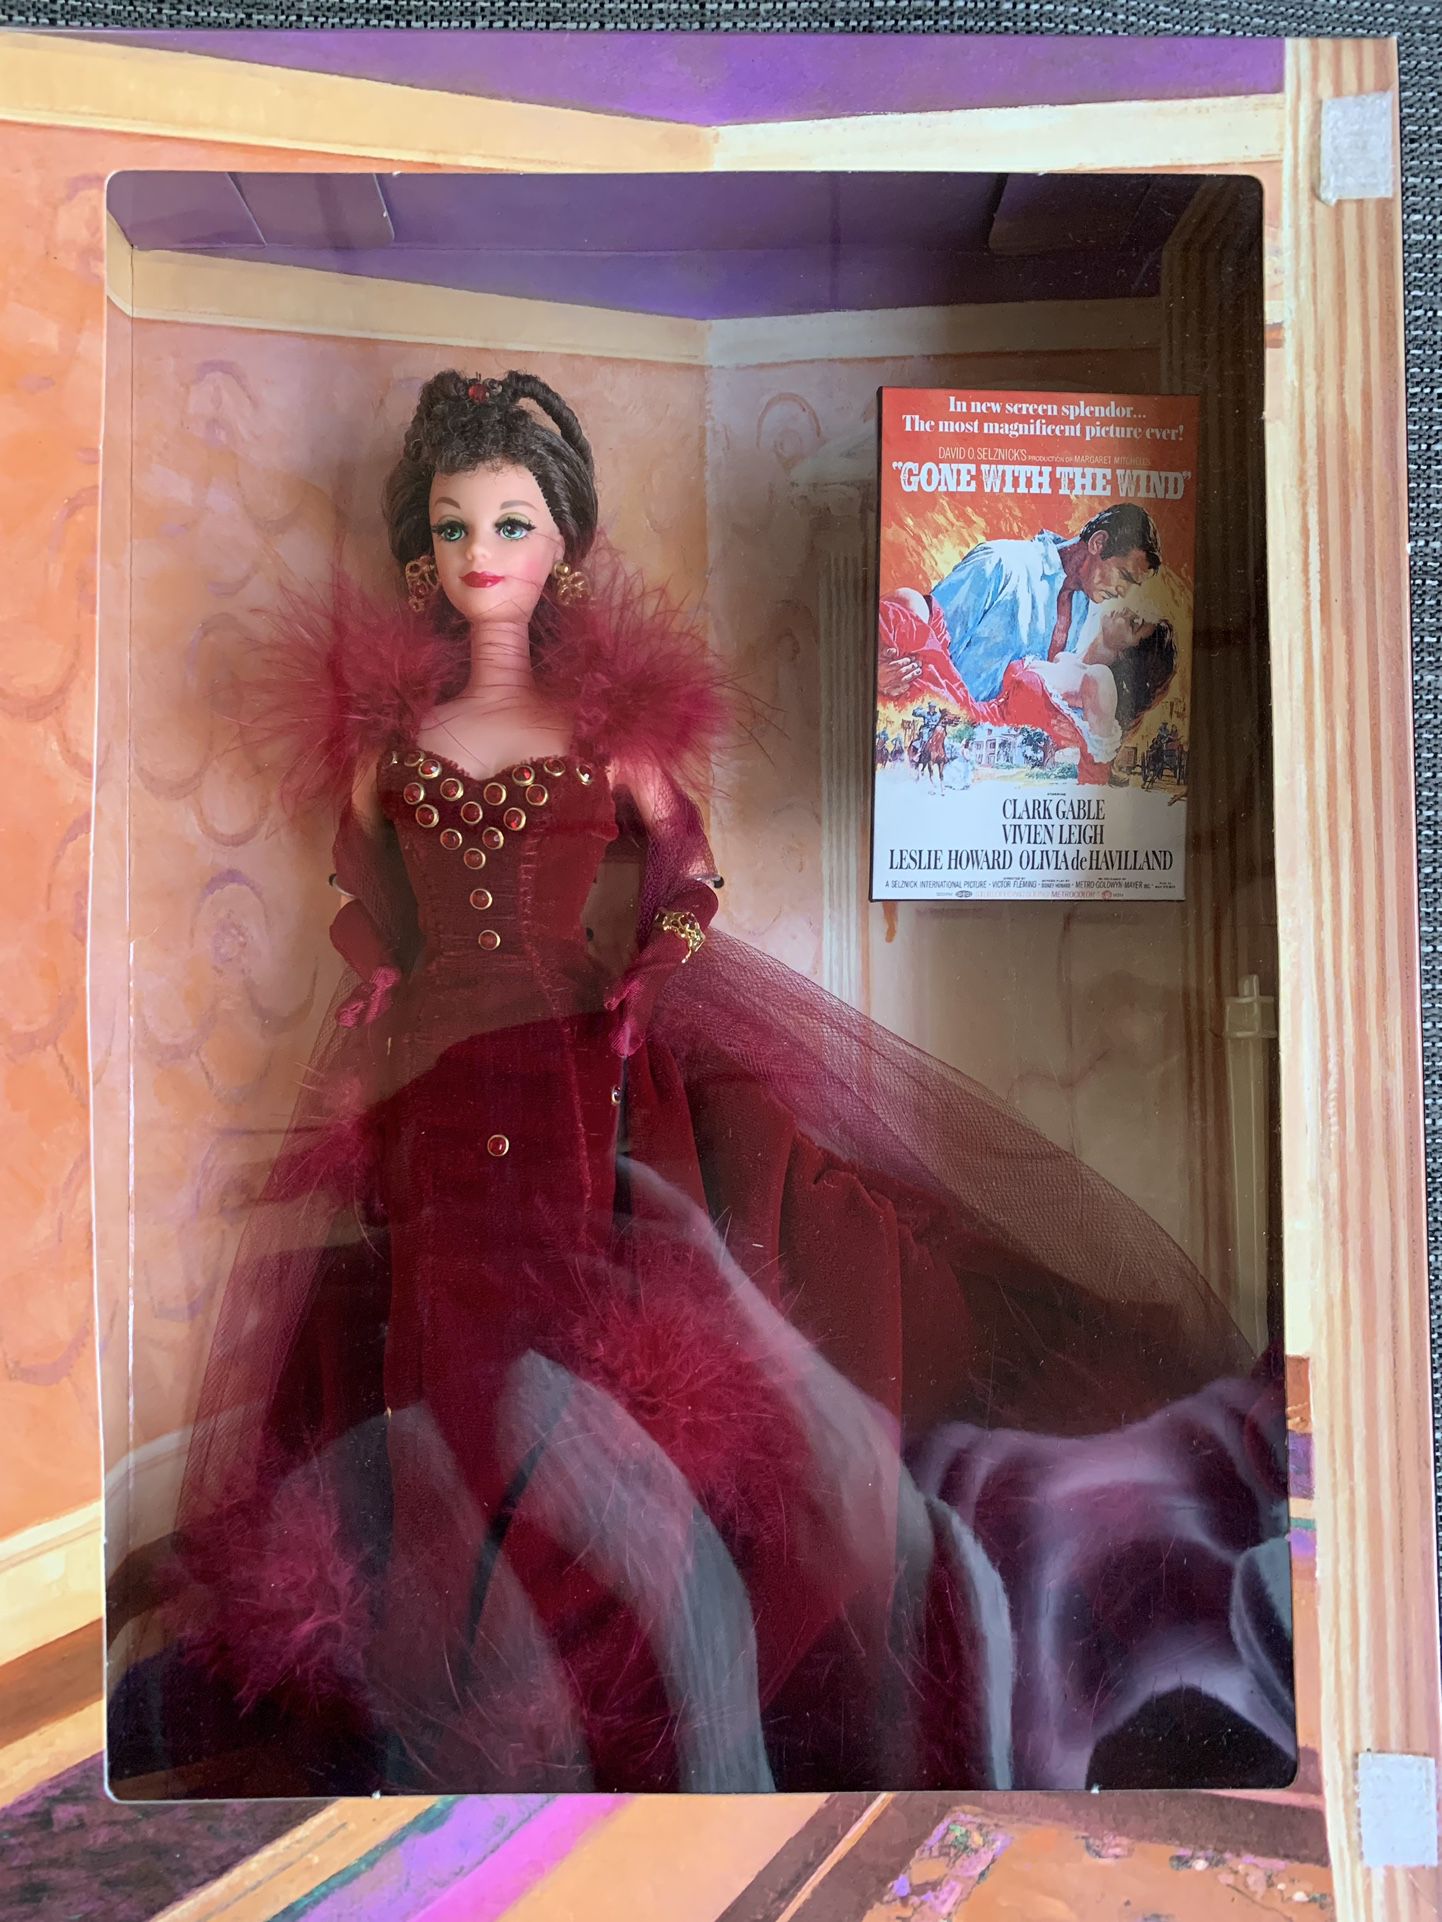 Barbie’s Scarlett O’Hara From Gone With The Wind